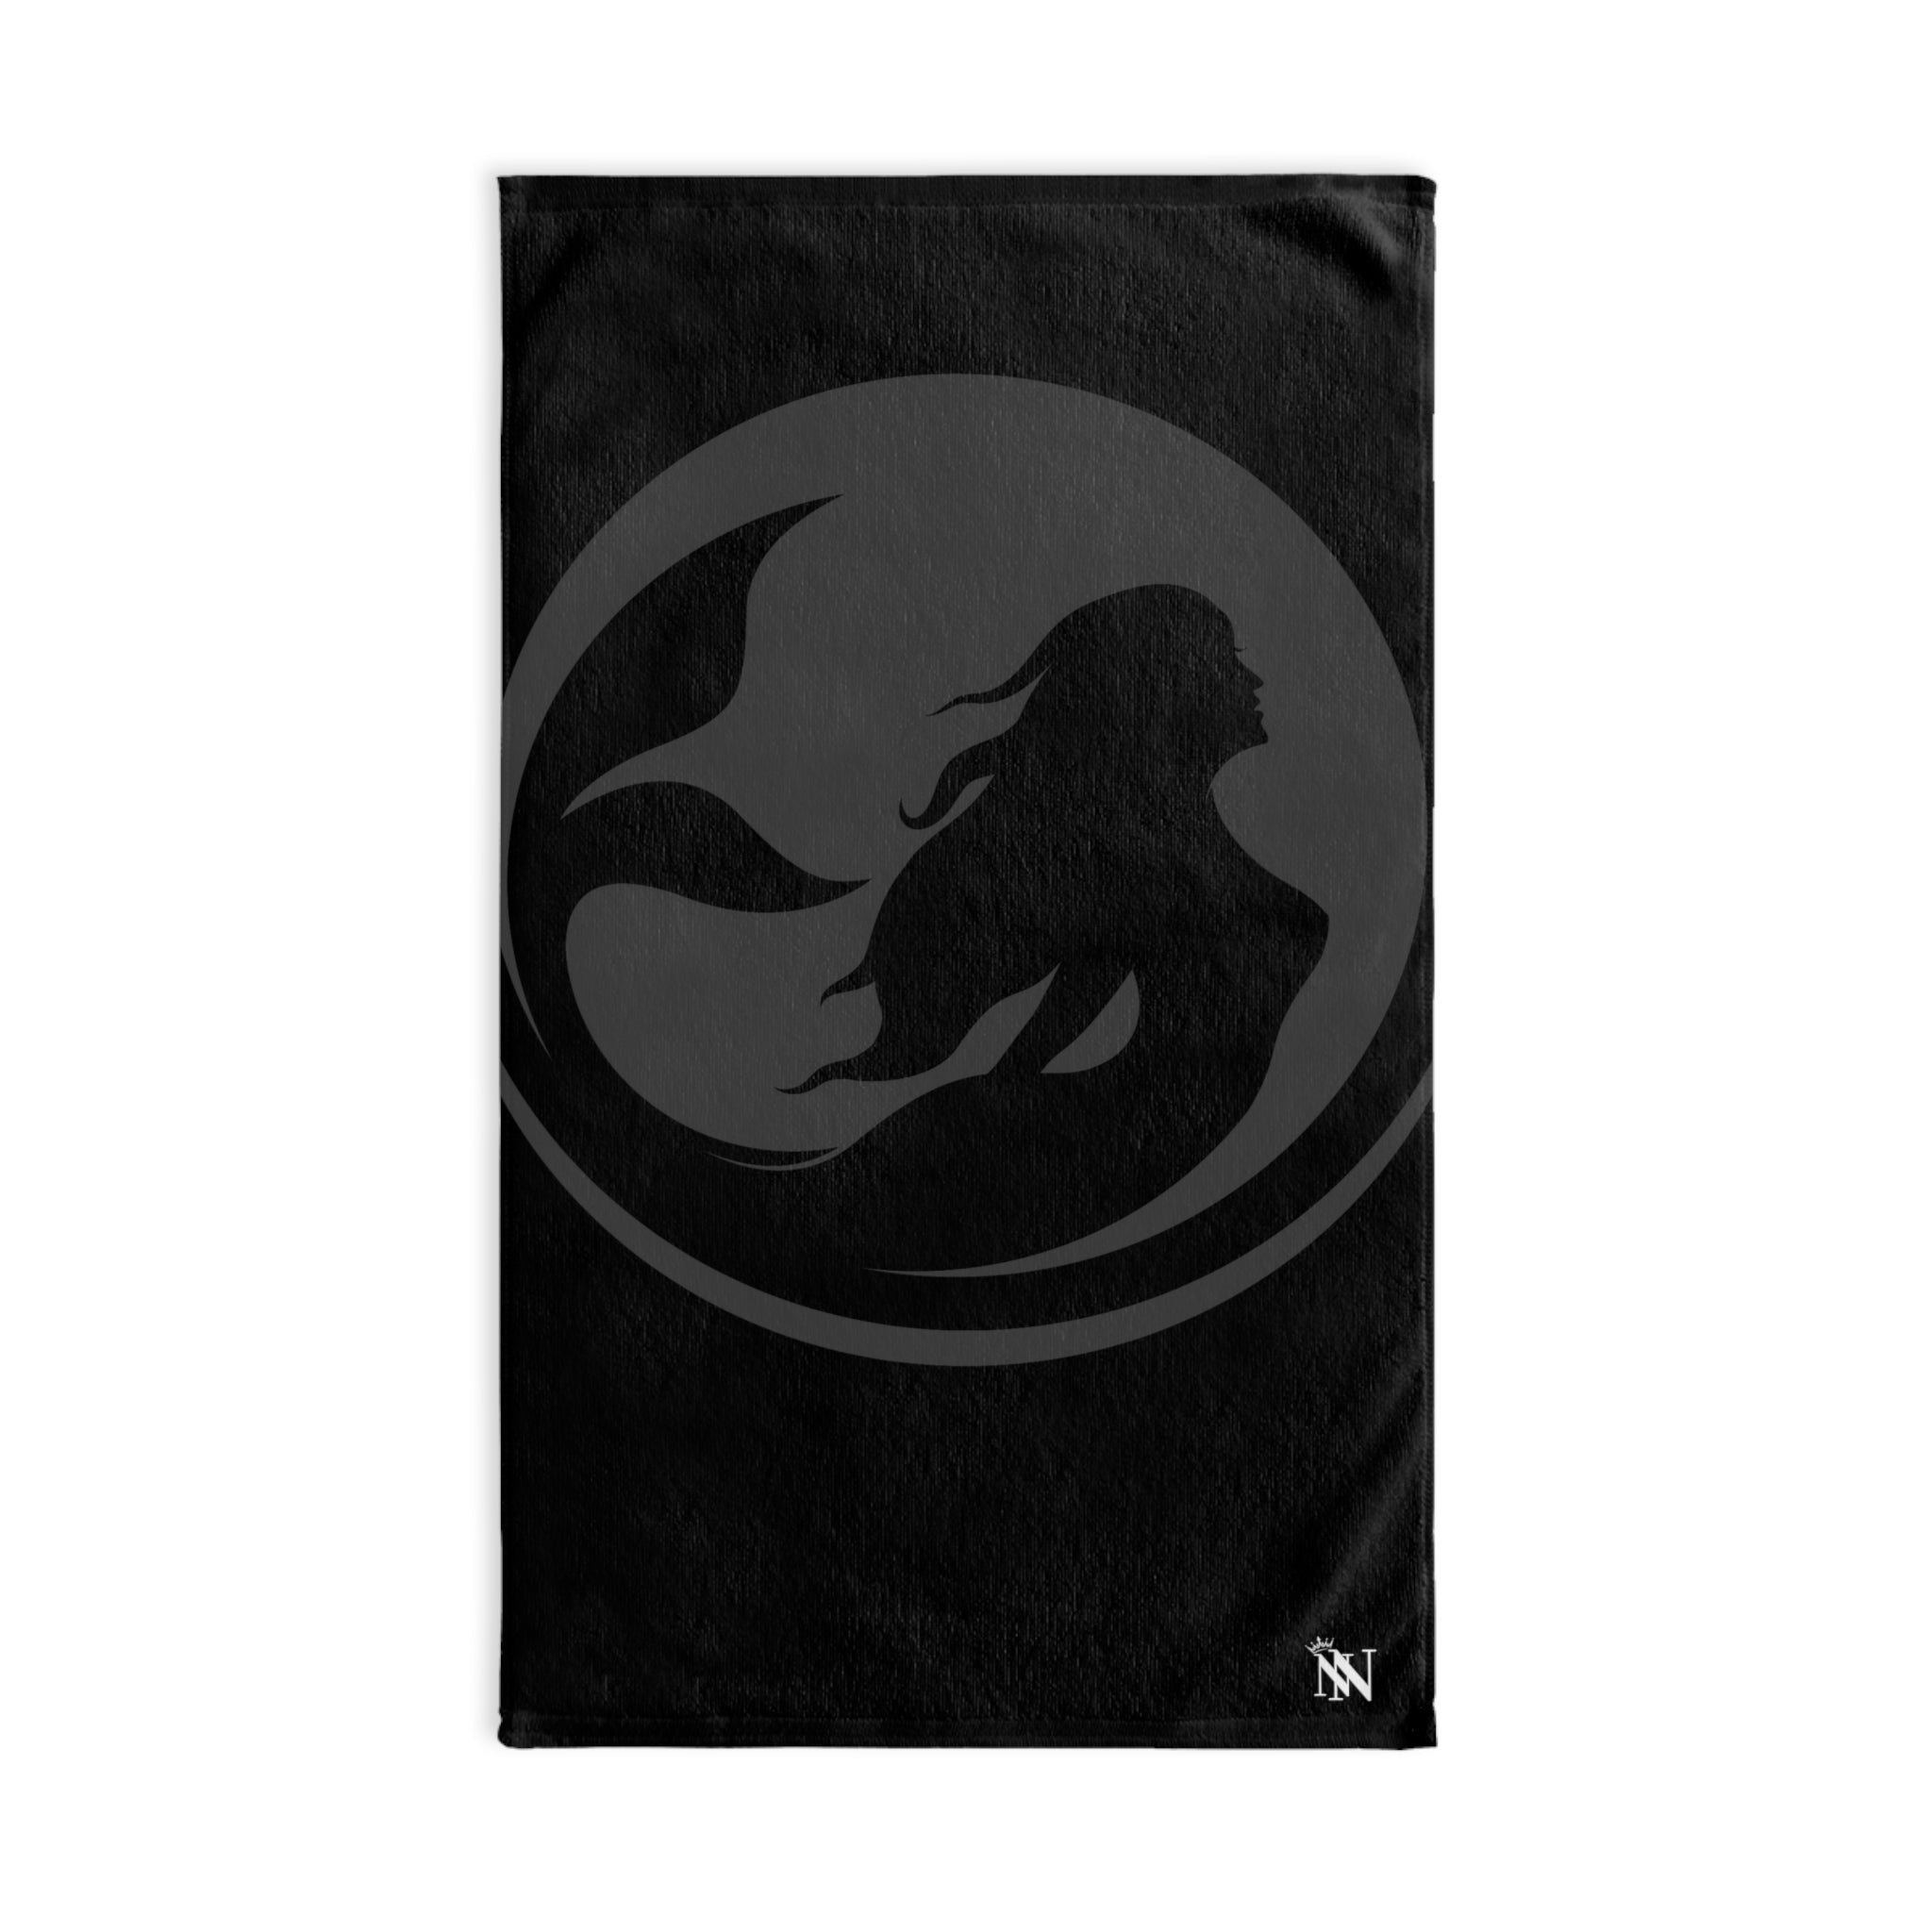 Eclipse Mermaid SeaBlack | Sexy Gifts for Boyfriend, Funny Towel Romantic Gift for Wedding Couple Fiance First Year 2nd Anniversary Valentines, Party Gag Gifts, Joke Humor Cloth for Husband Men BF NECTAR NAPKINS